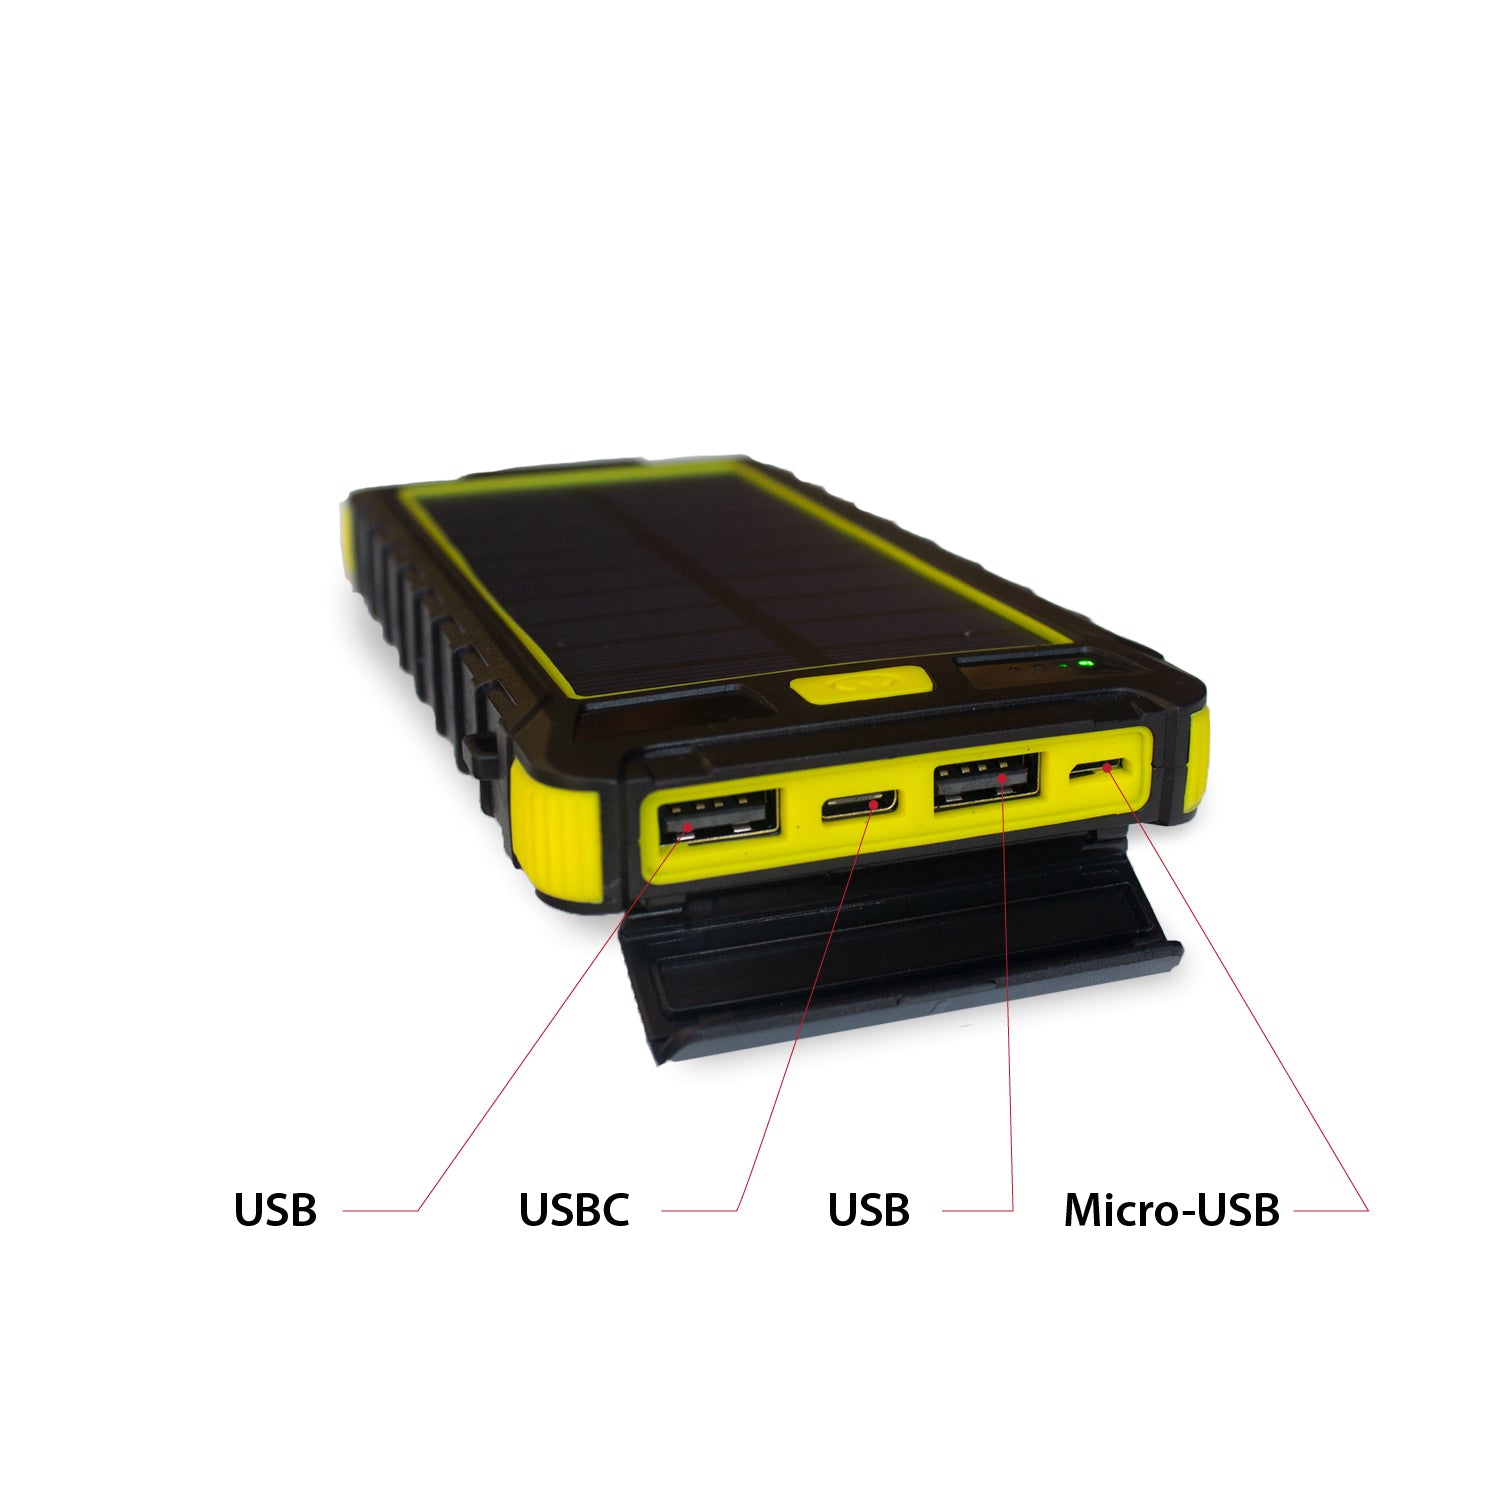 Solar Power Bank with USB Ports for charging phones or electronic devices 10,000 mAh capacity